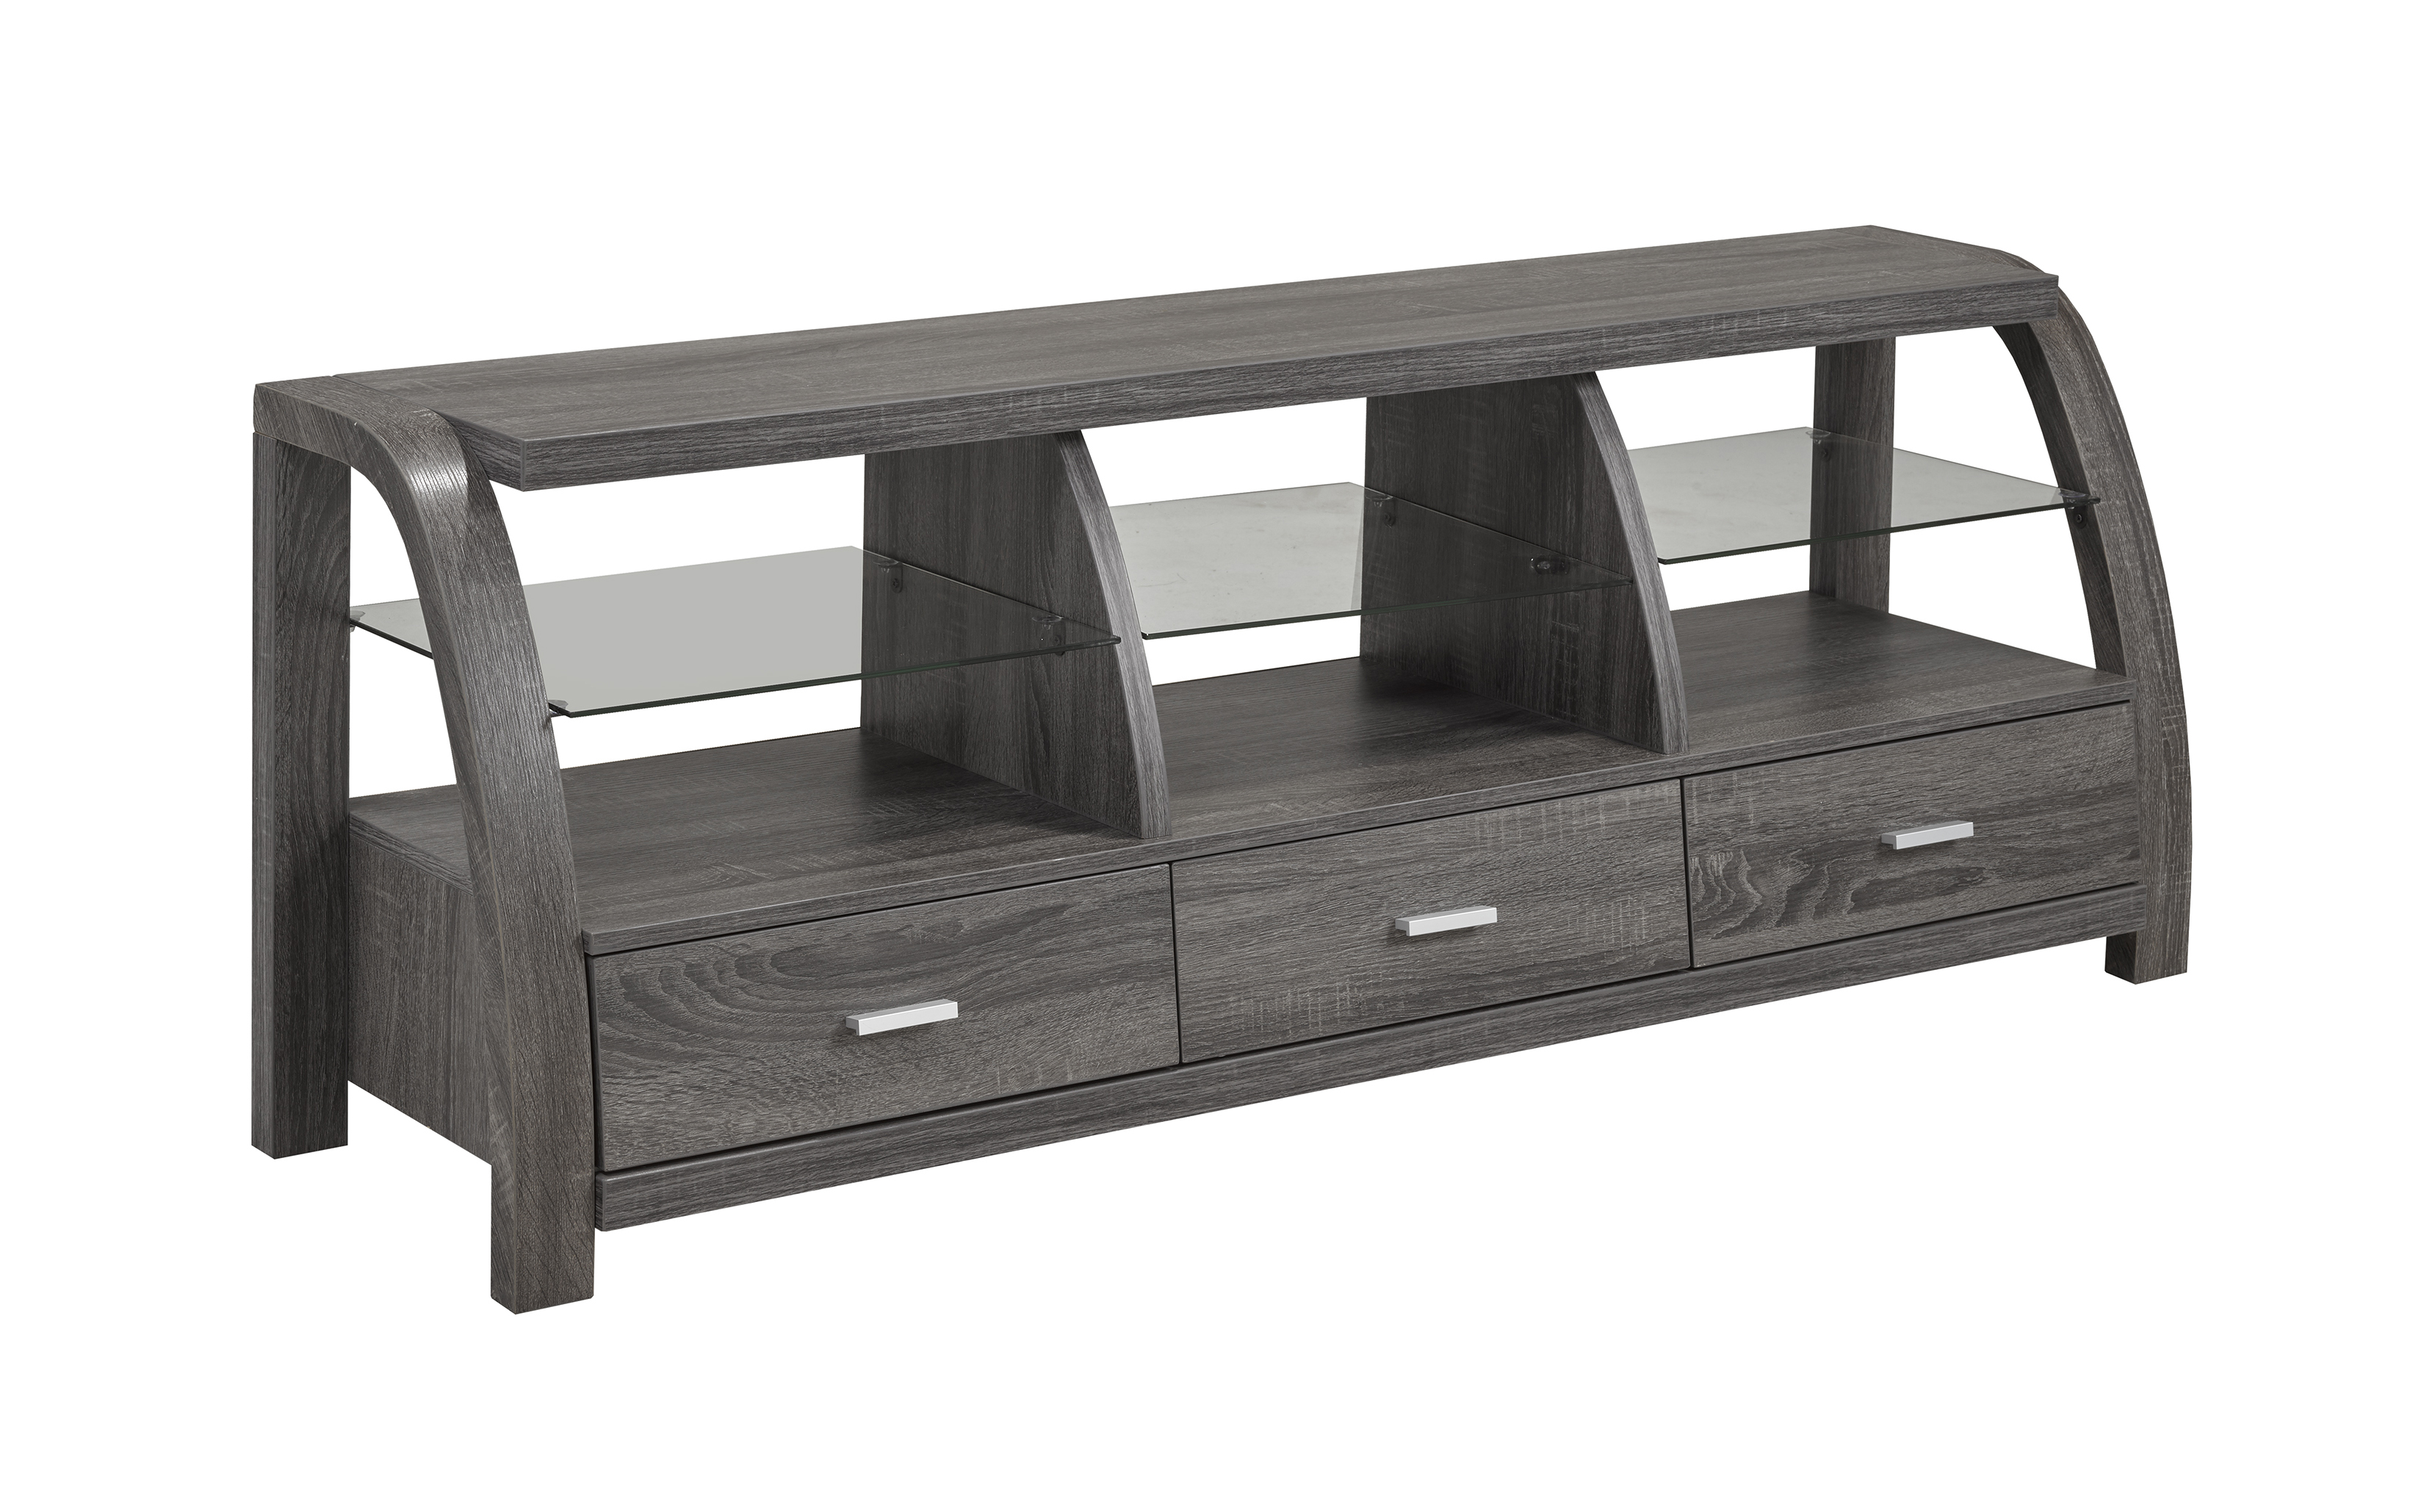 60'' TV STAND - GREY